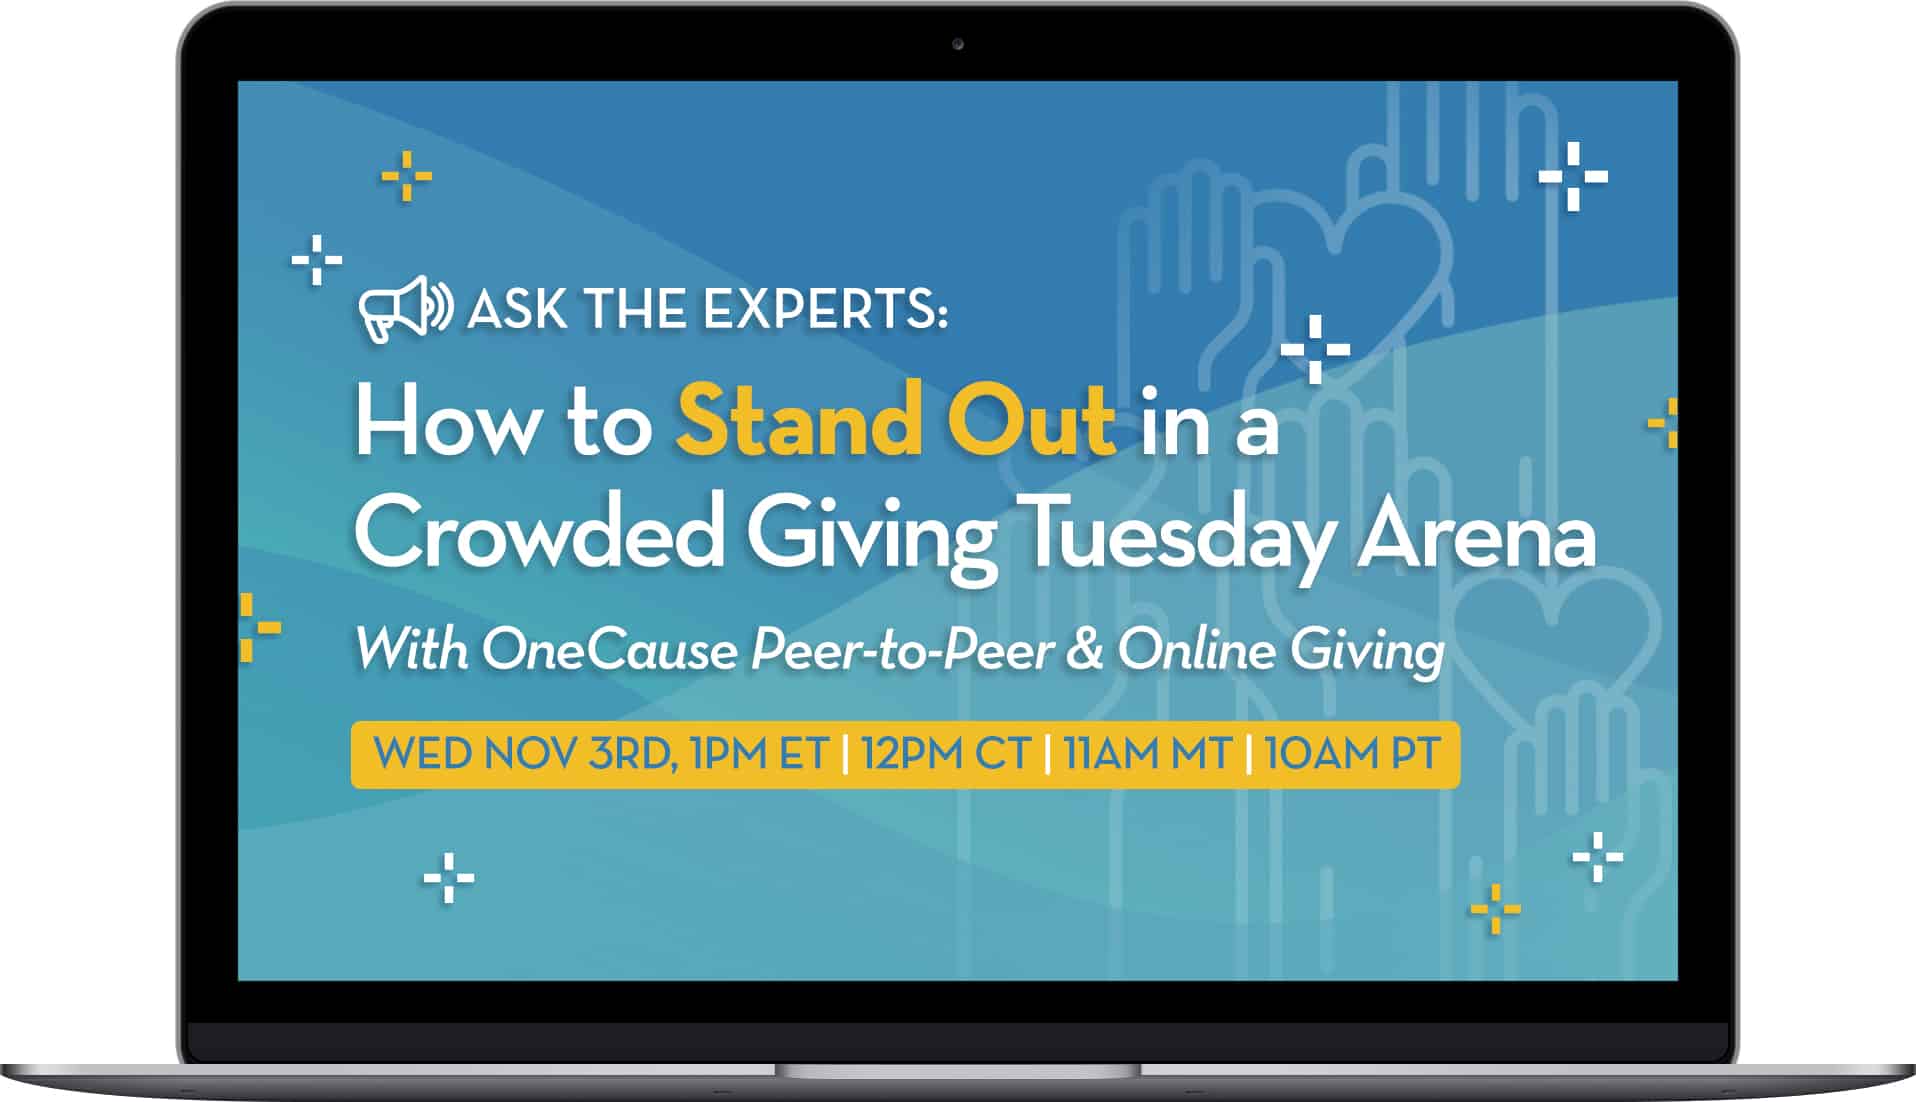 How to Stand Out in a Crowded Giving Tuesday Arena-P2PAskTheExpertsWebinar-ipad